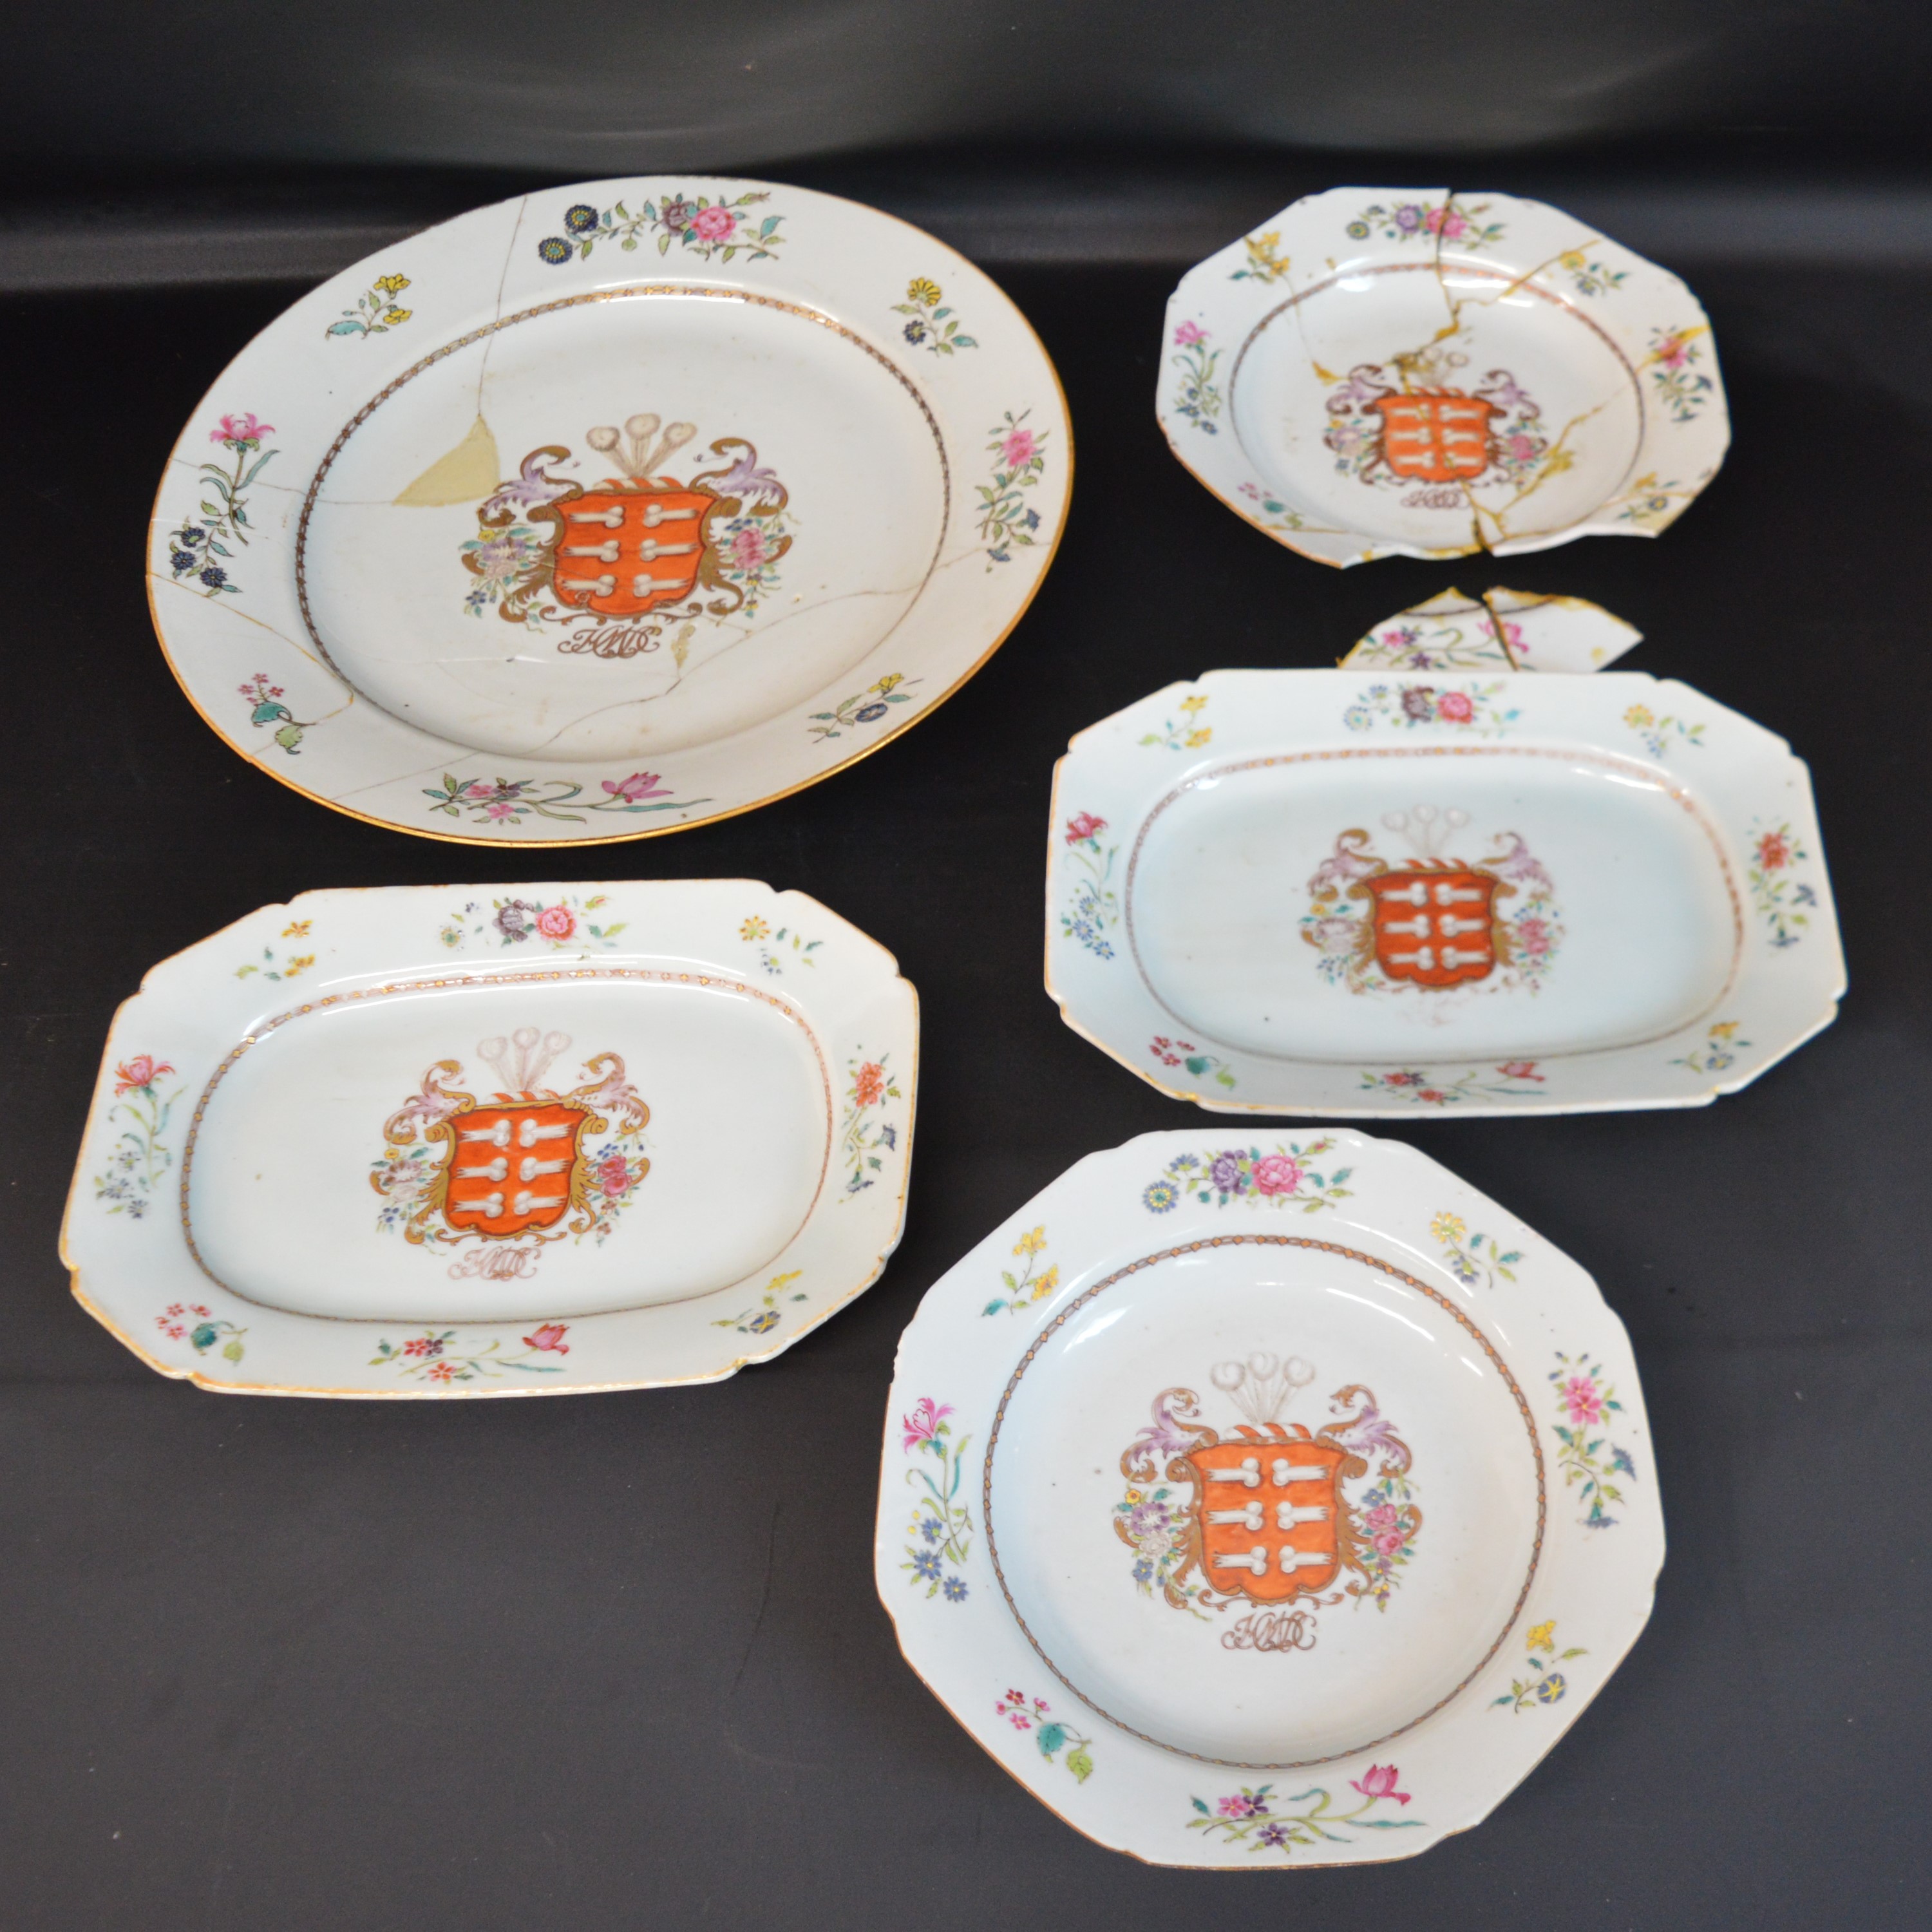 5 pieces of 18th century ceramic Chinese armorial export ware comprising 2 soup bowls, 2 tureen